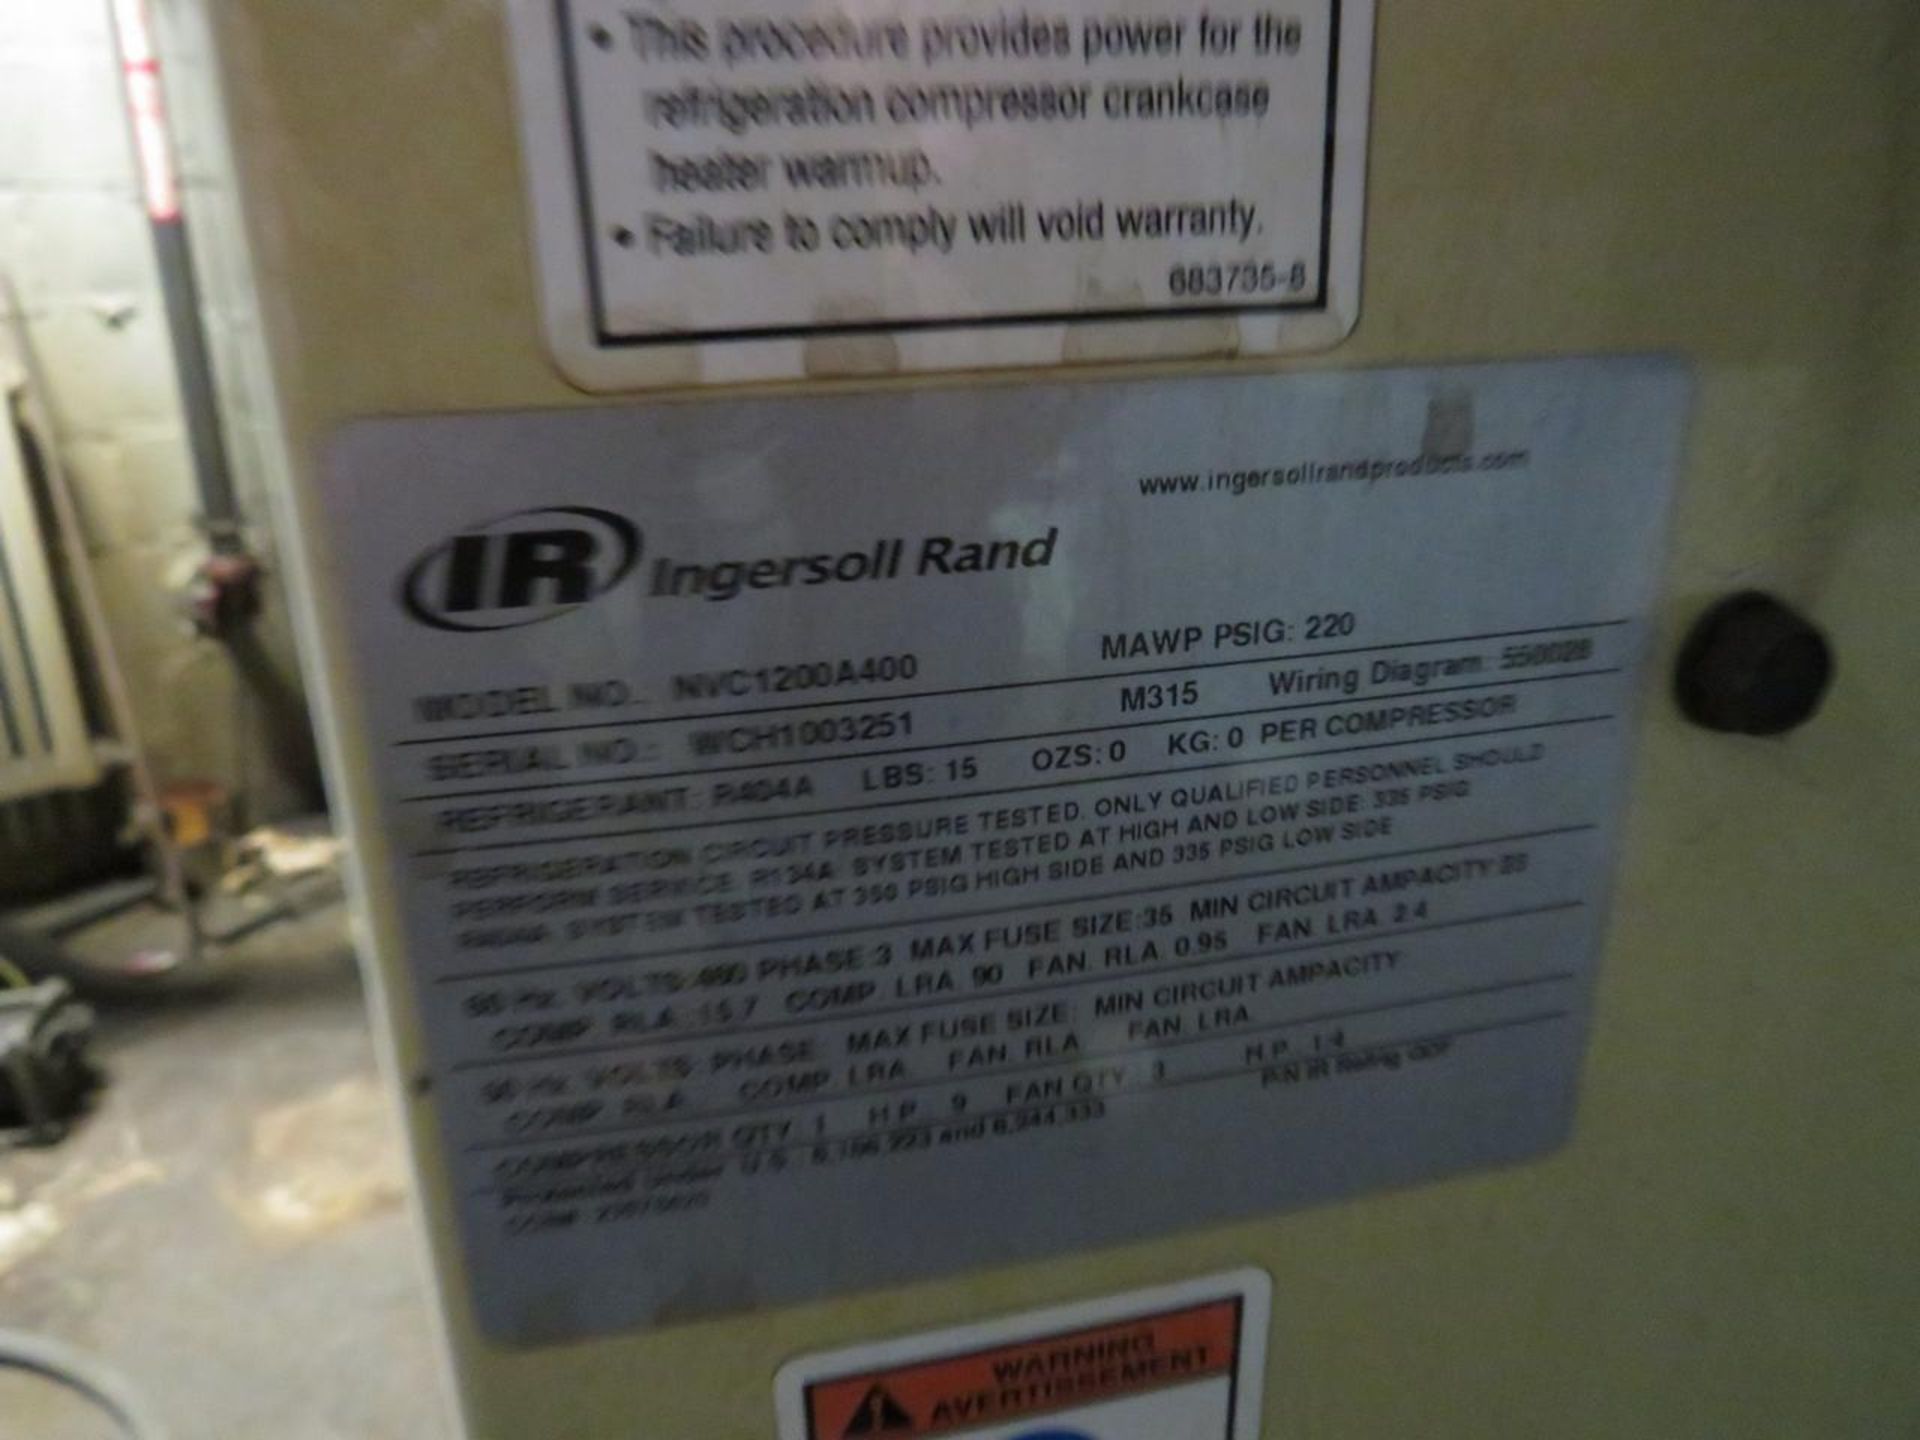 Ingersoll Rand NVC1200A400 Air Dryer - Image 3 of 4